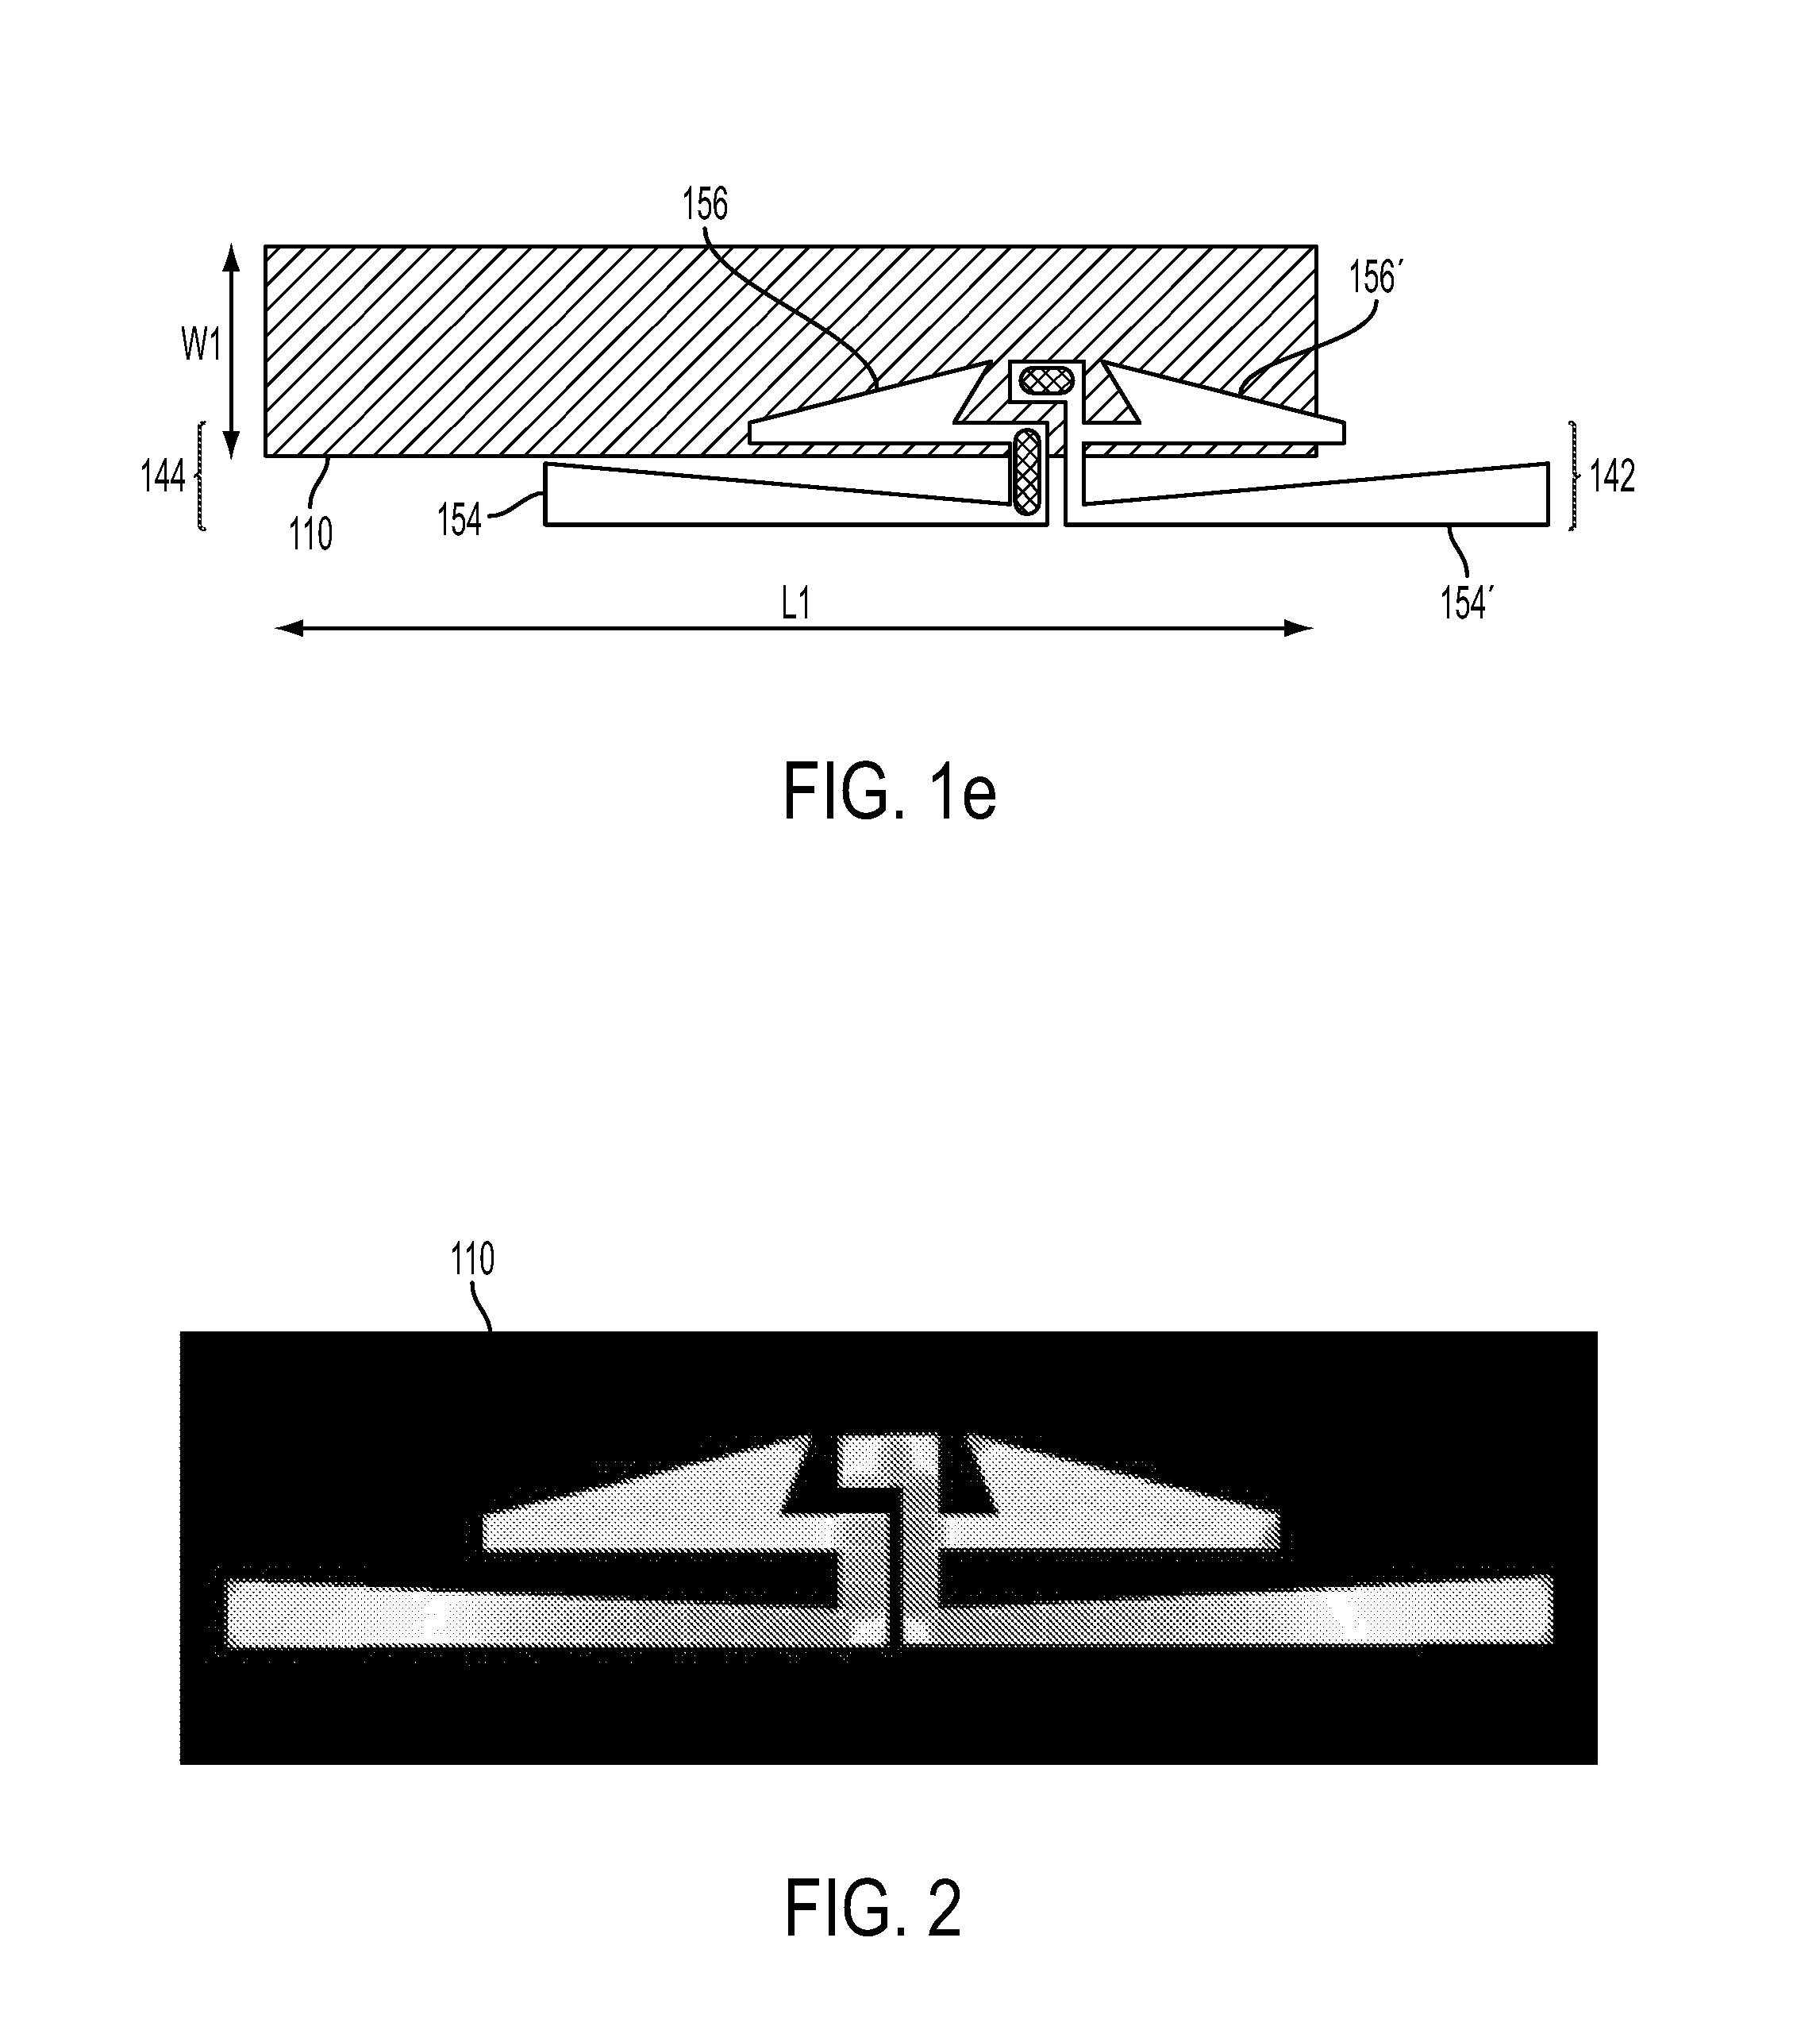 Coupled Dual-Band Dipole Antenna with Interference Cancellation Gap, Method of Manufacture and Kits Therefor